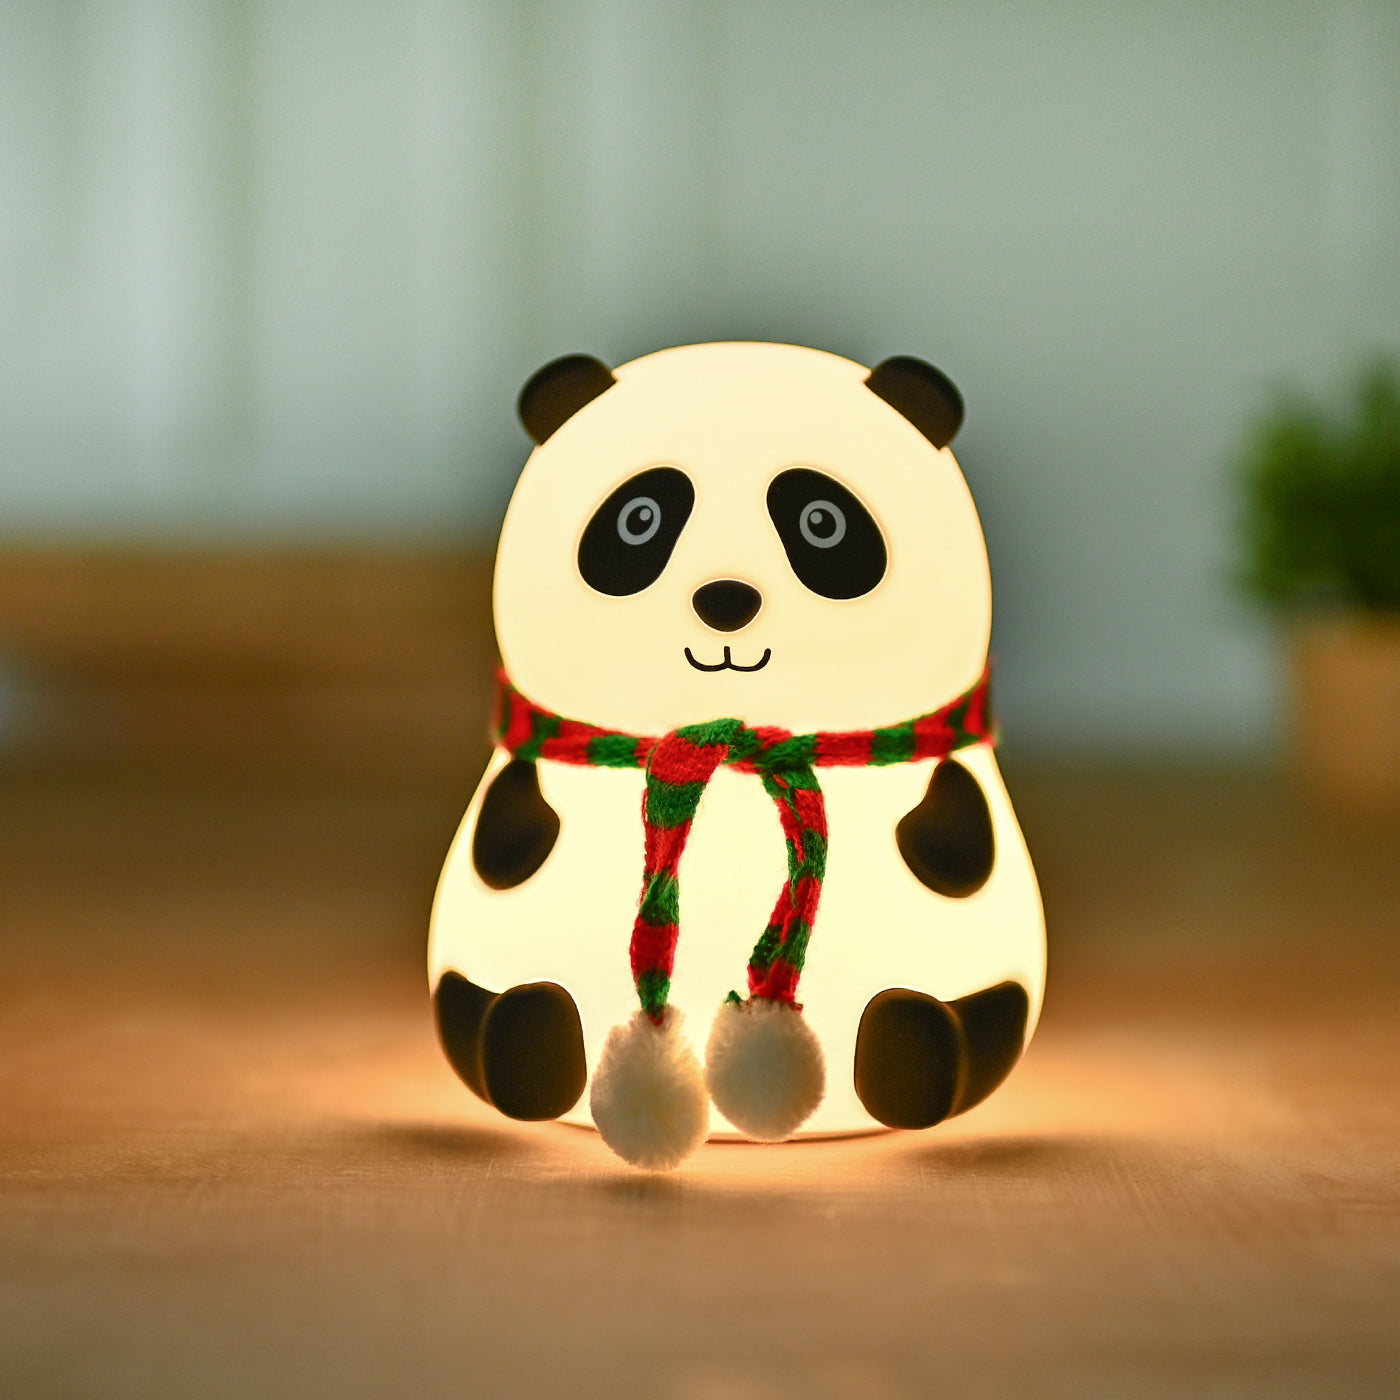 Silicone Panda Night Lamp for children | Bedroom | Christmas Gift | Tap Lamp | Multiple Colors